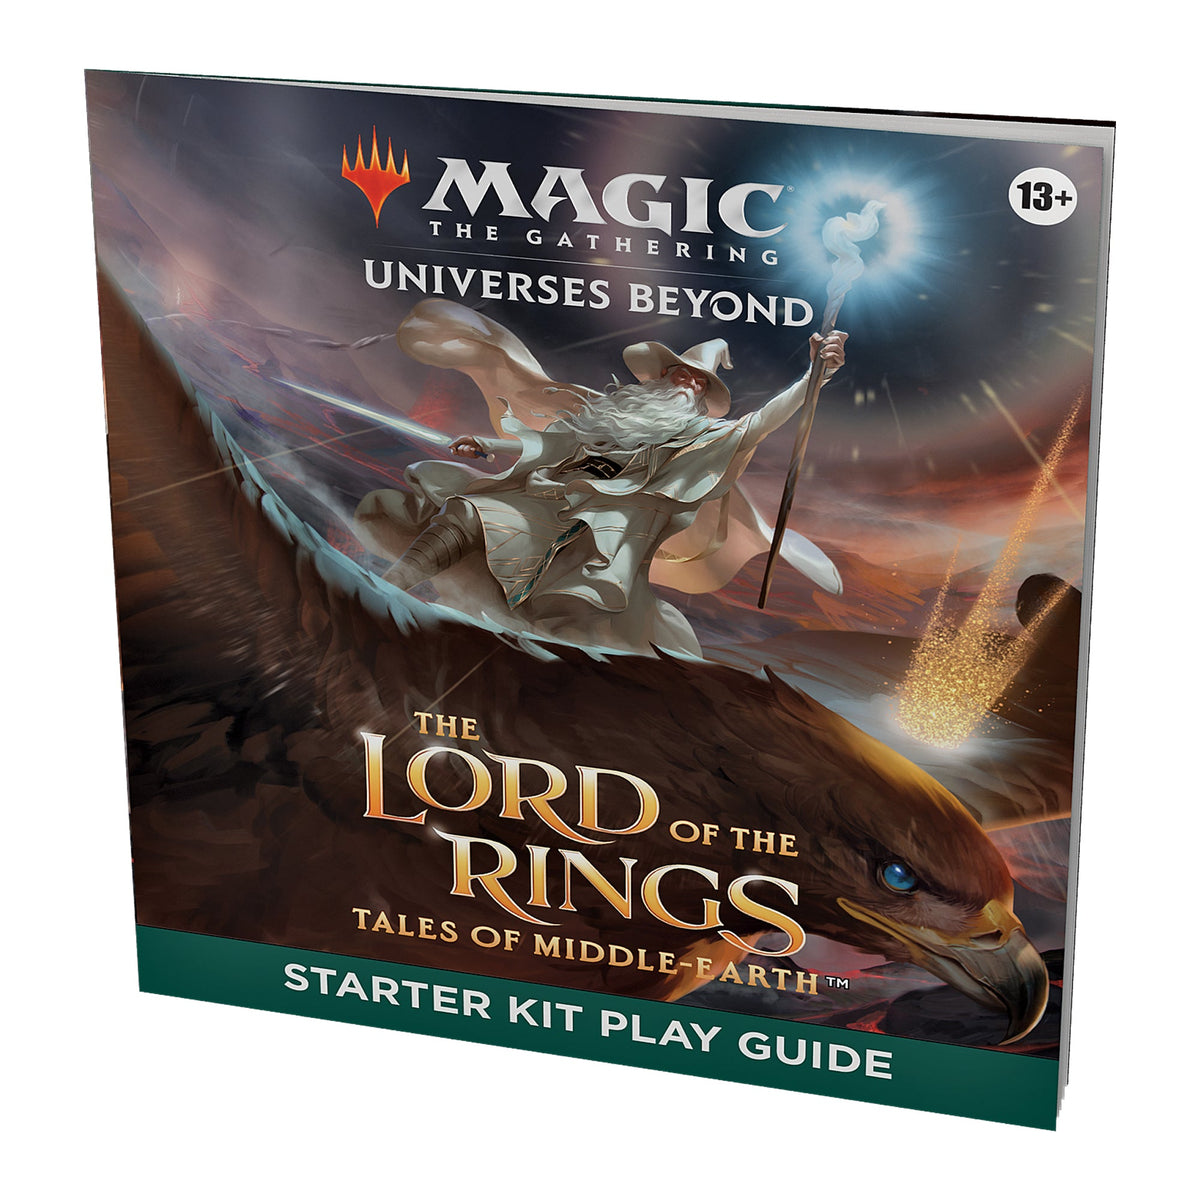 Magic MTG - The Lord of the Rings: Tales of Middle-Earth (Starter Kit)